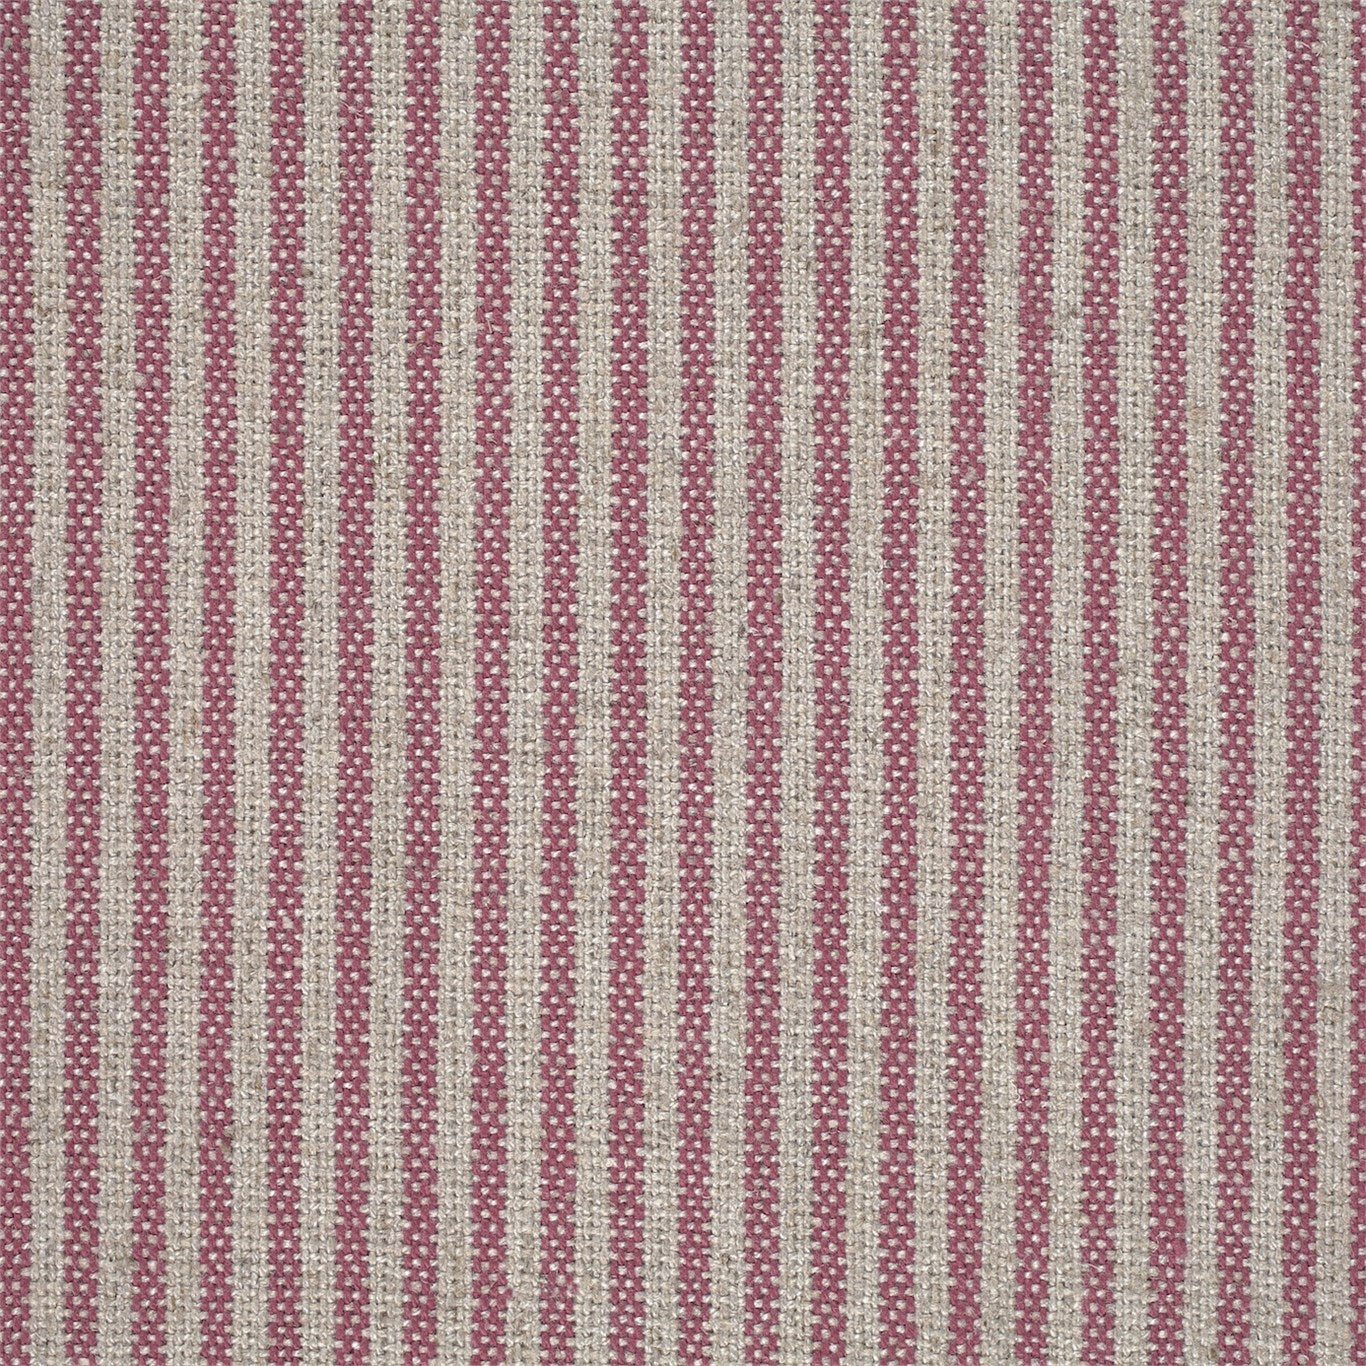 Emiko Fabric by Sanderson Home - DCHK233558 - Rose